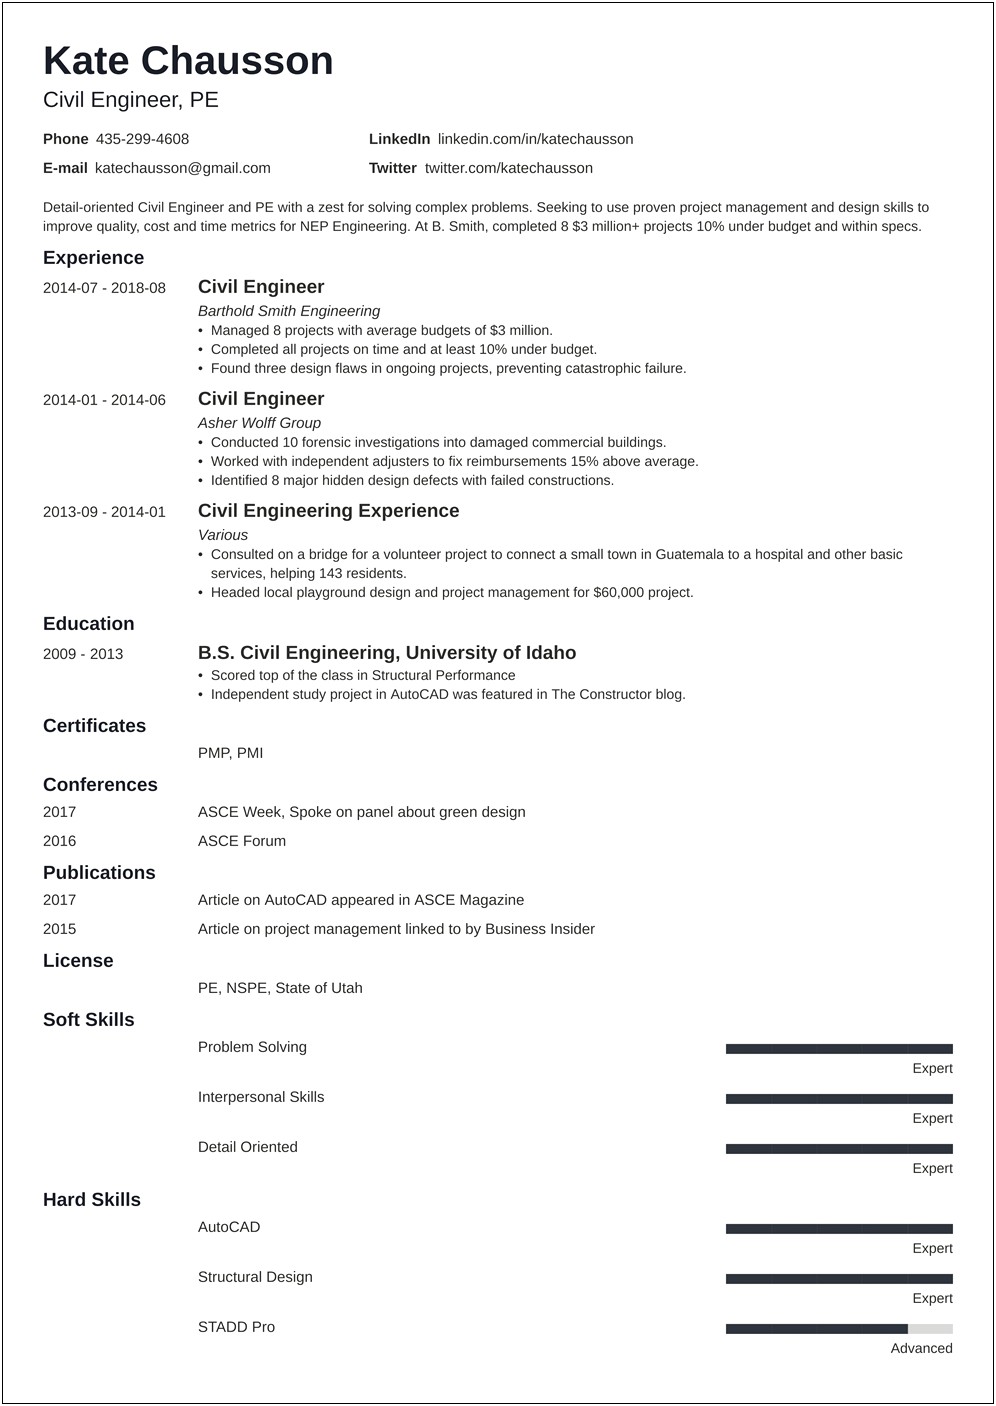 Civil Engineer Resume Example With Asce